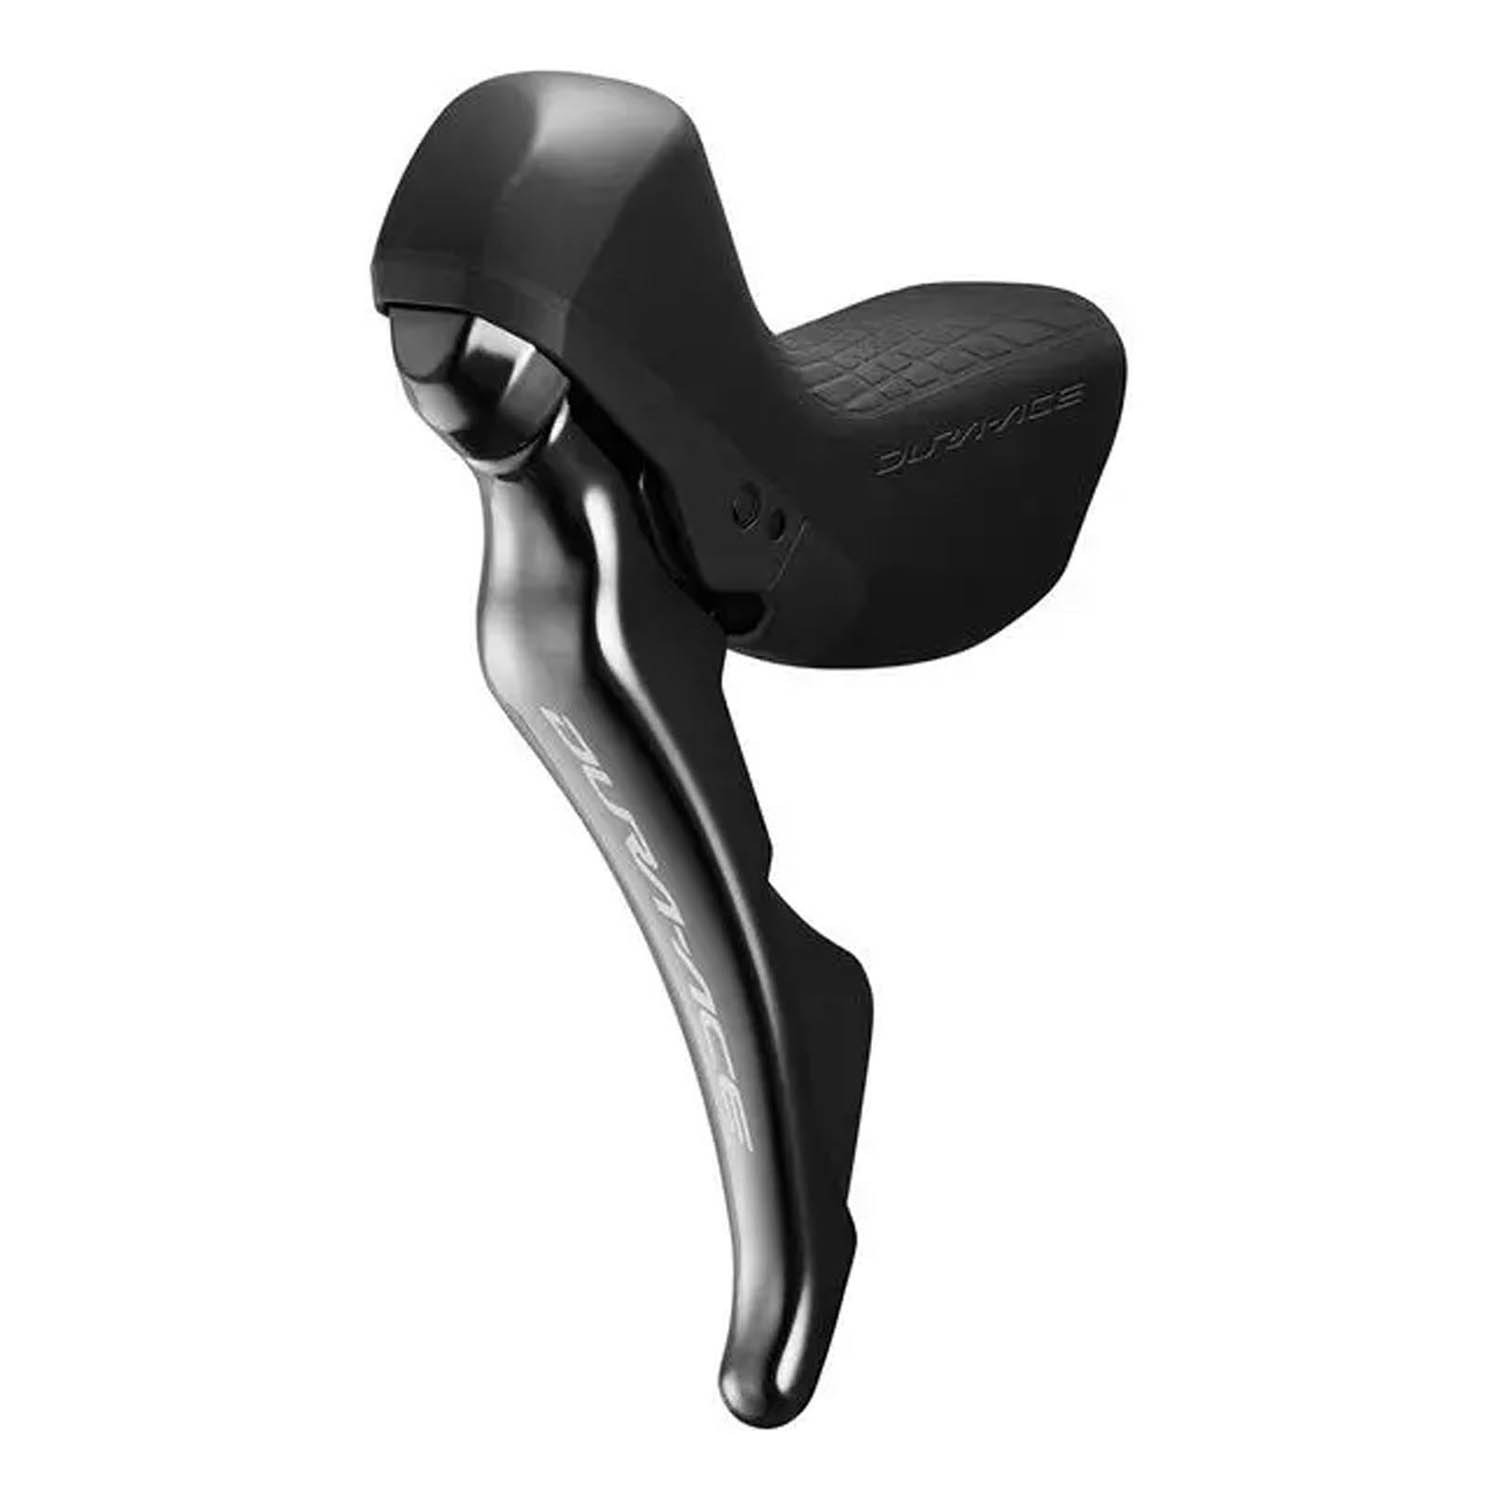 Shimano racefiets shifters Dura-Ace R9120